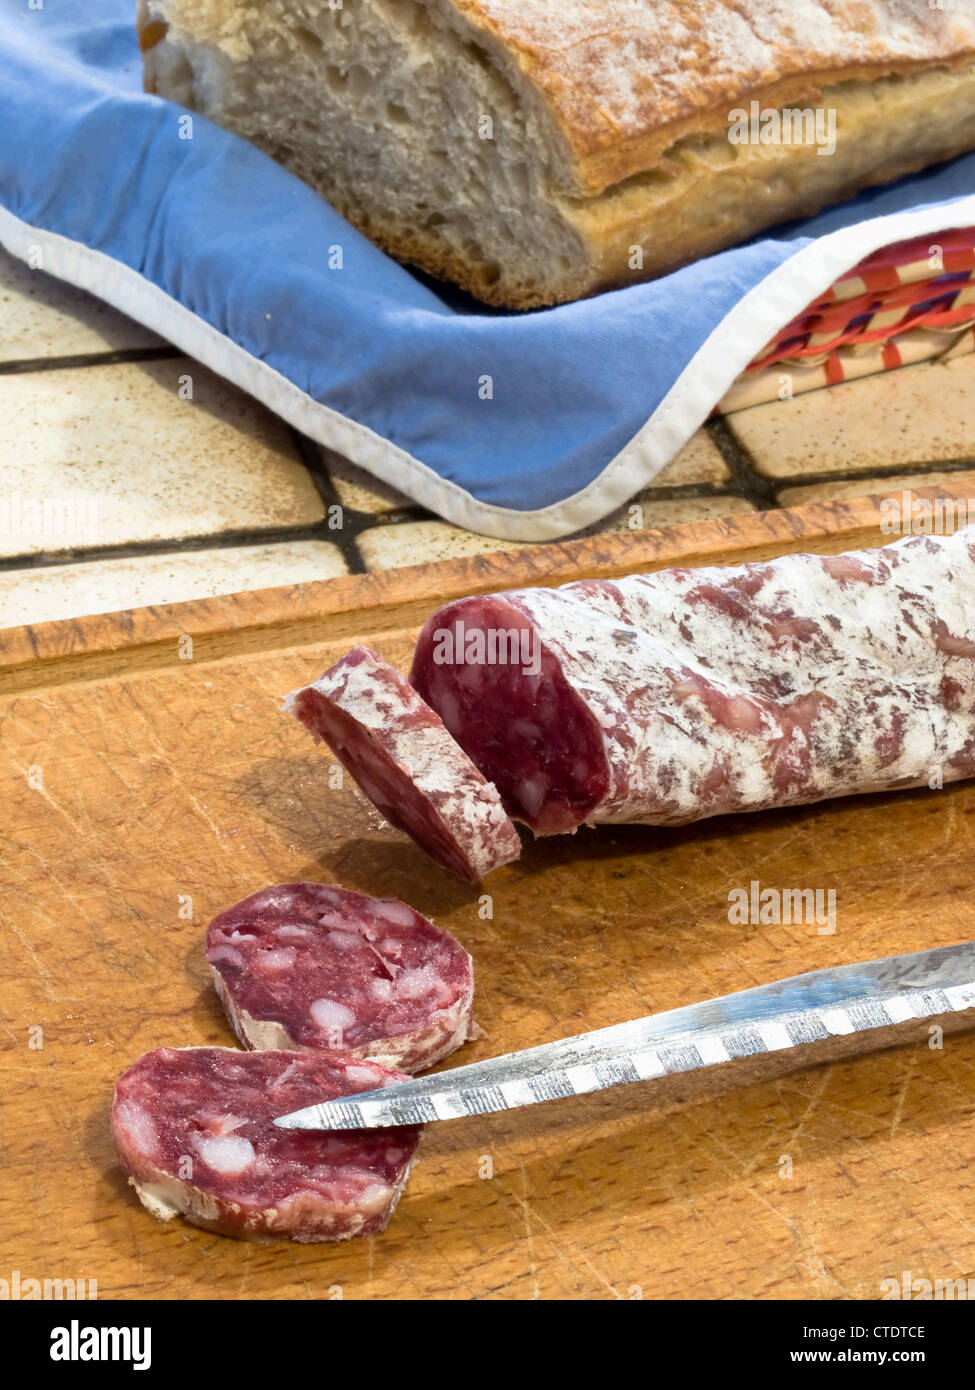 French dry sausage on a wooden cutting board with slices cut off and a knife. A bread is present in background. Stock Photo